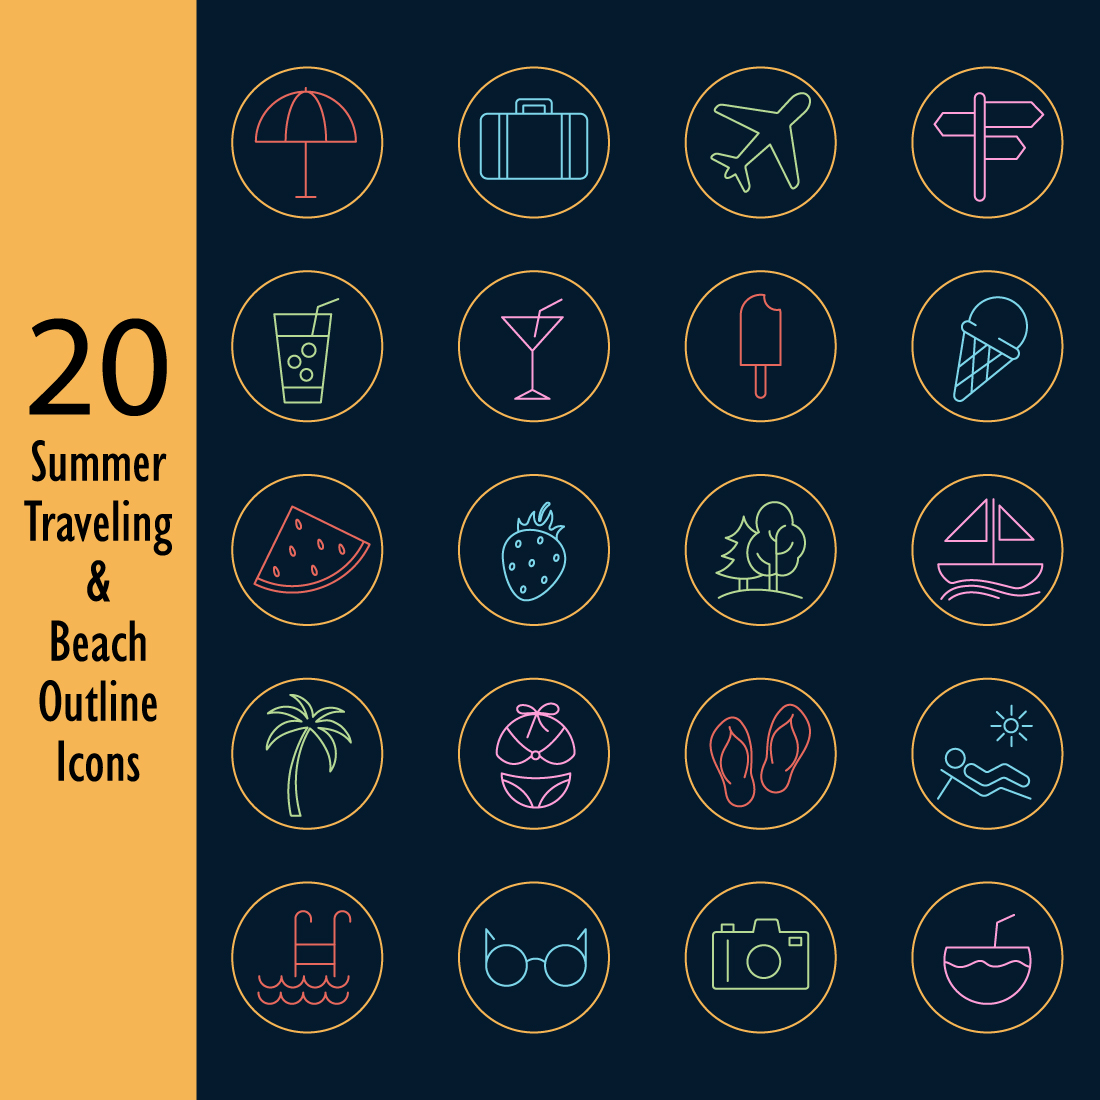 20 Summer traveling and beach outline icons preview image.